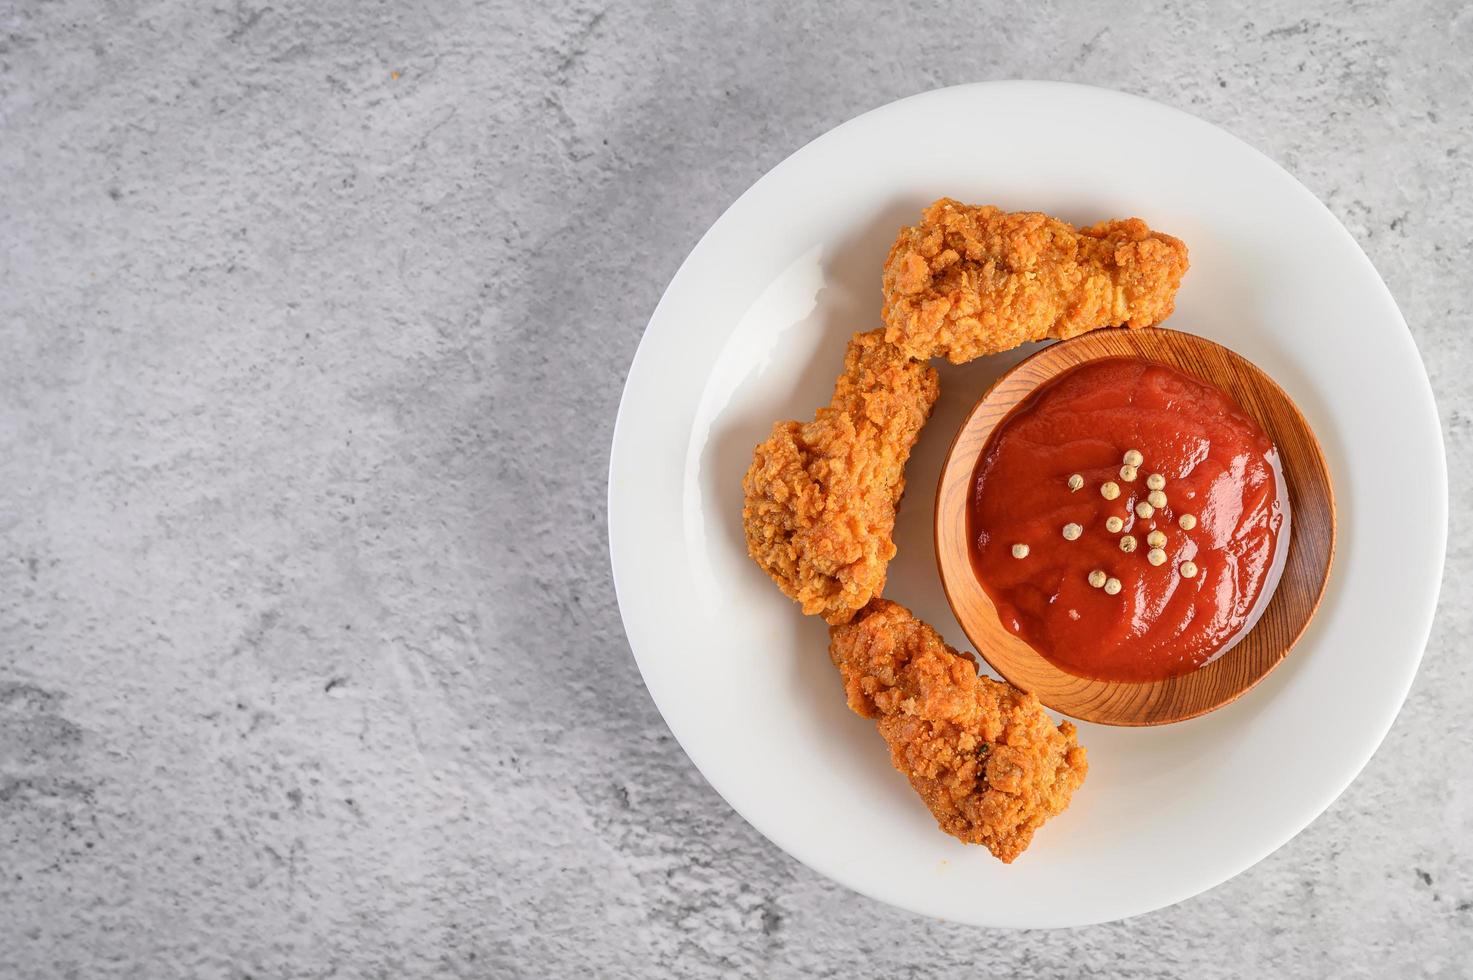 Crispy fried chicken with tomato sauce photo